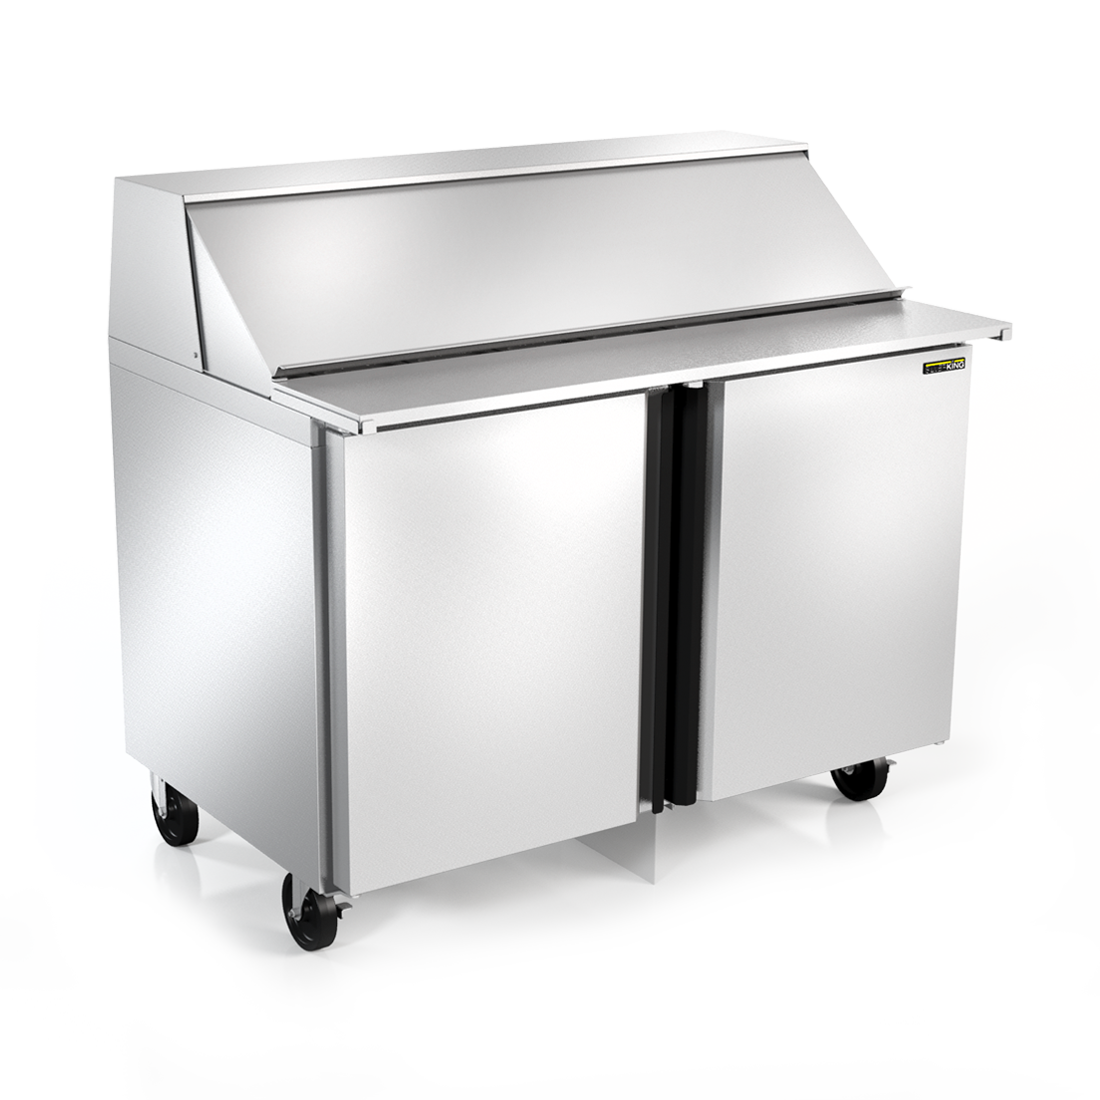 Silver King SKPS8 115V 8 Pan Refrigerated Countertop Food Prep Station  Table Top Sandwich Shop - 43L x 16 1/2W x 10H